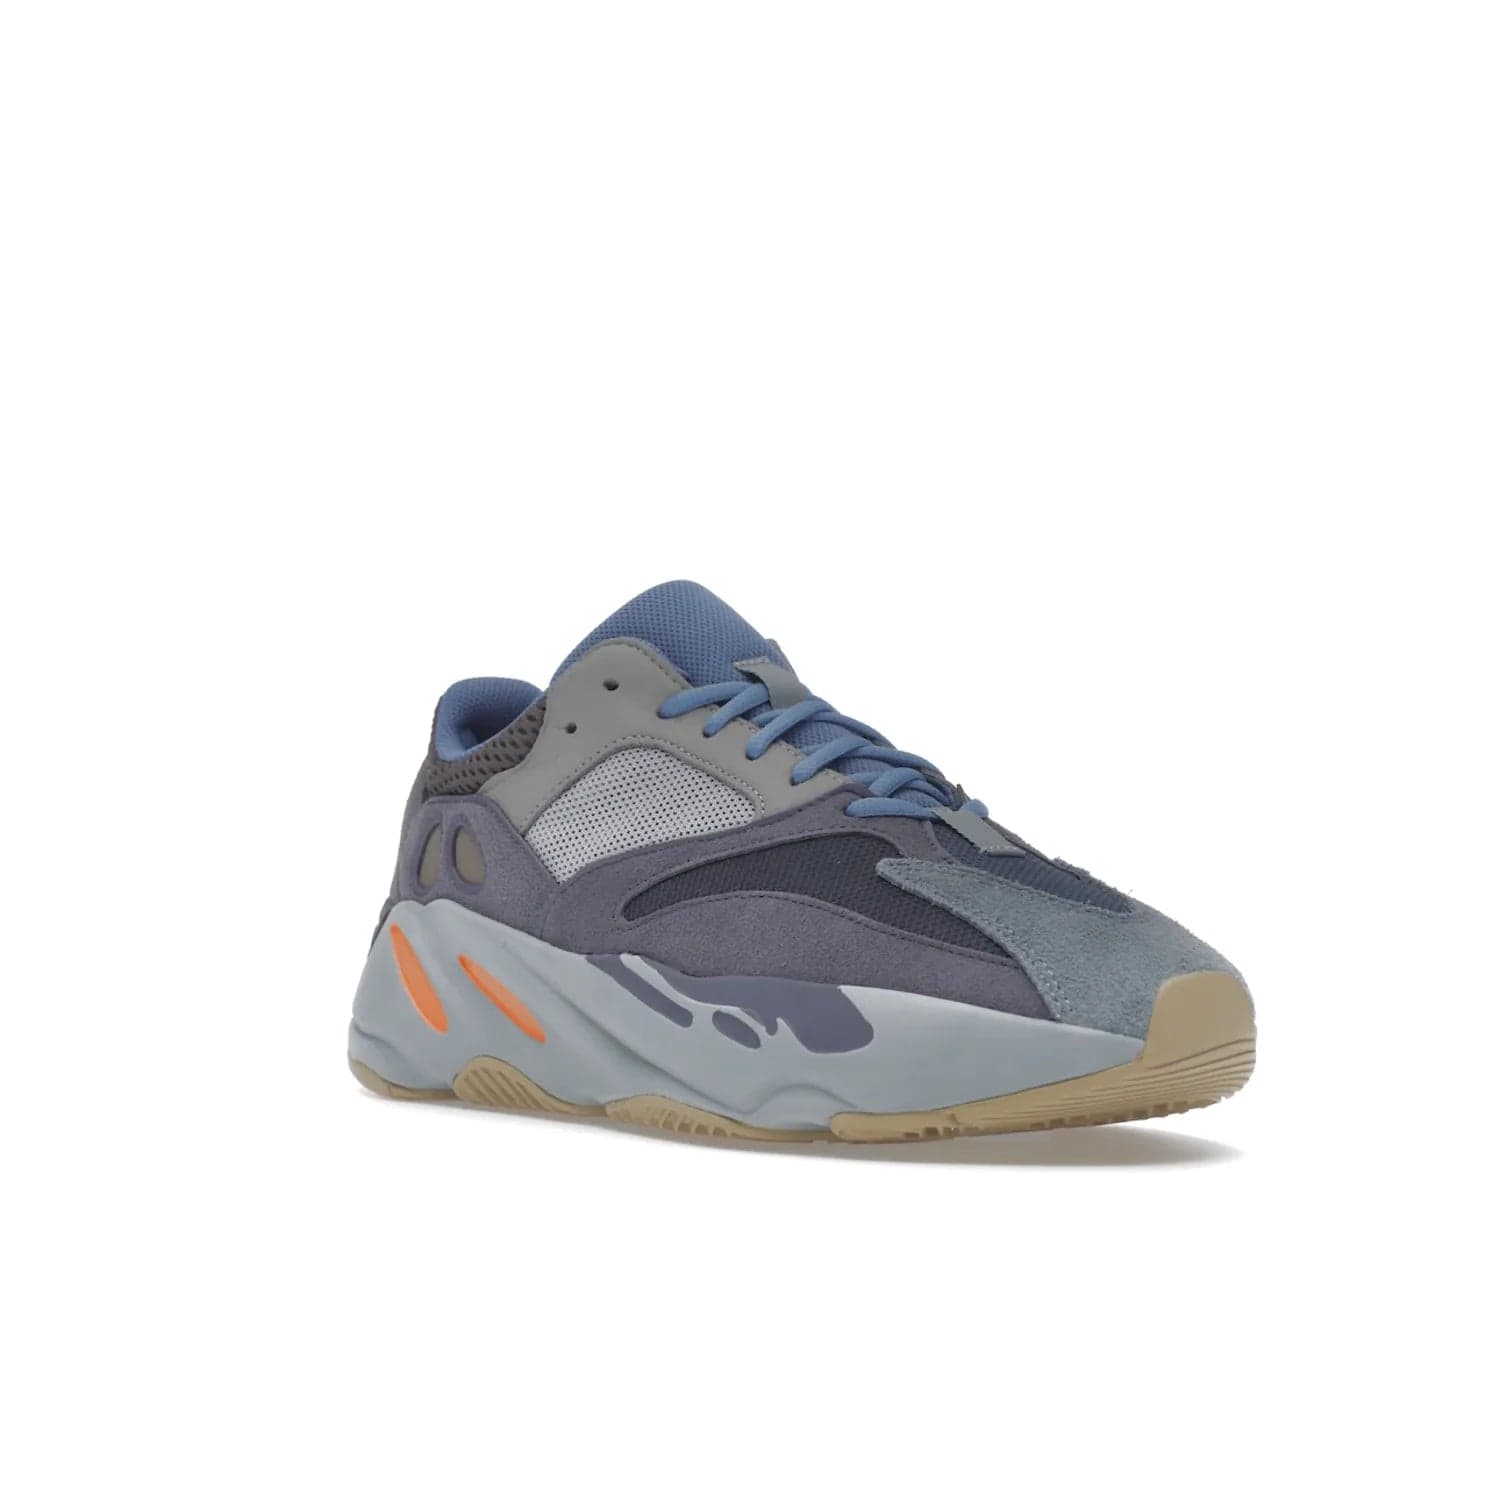 adidas Yeezy Boost 700 Carbon Blue - Image 6 - Only at www.BallersClubKickz.com - Style meets practicality with the adidas Yeezy Boost 700 Carbon Blue. Tonal grey and carbon blue mix of suede and mesh upper, grey midsole and gum outsole. Get yours today.